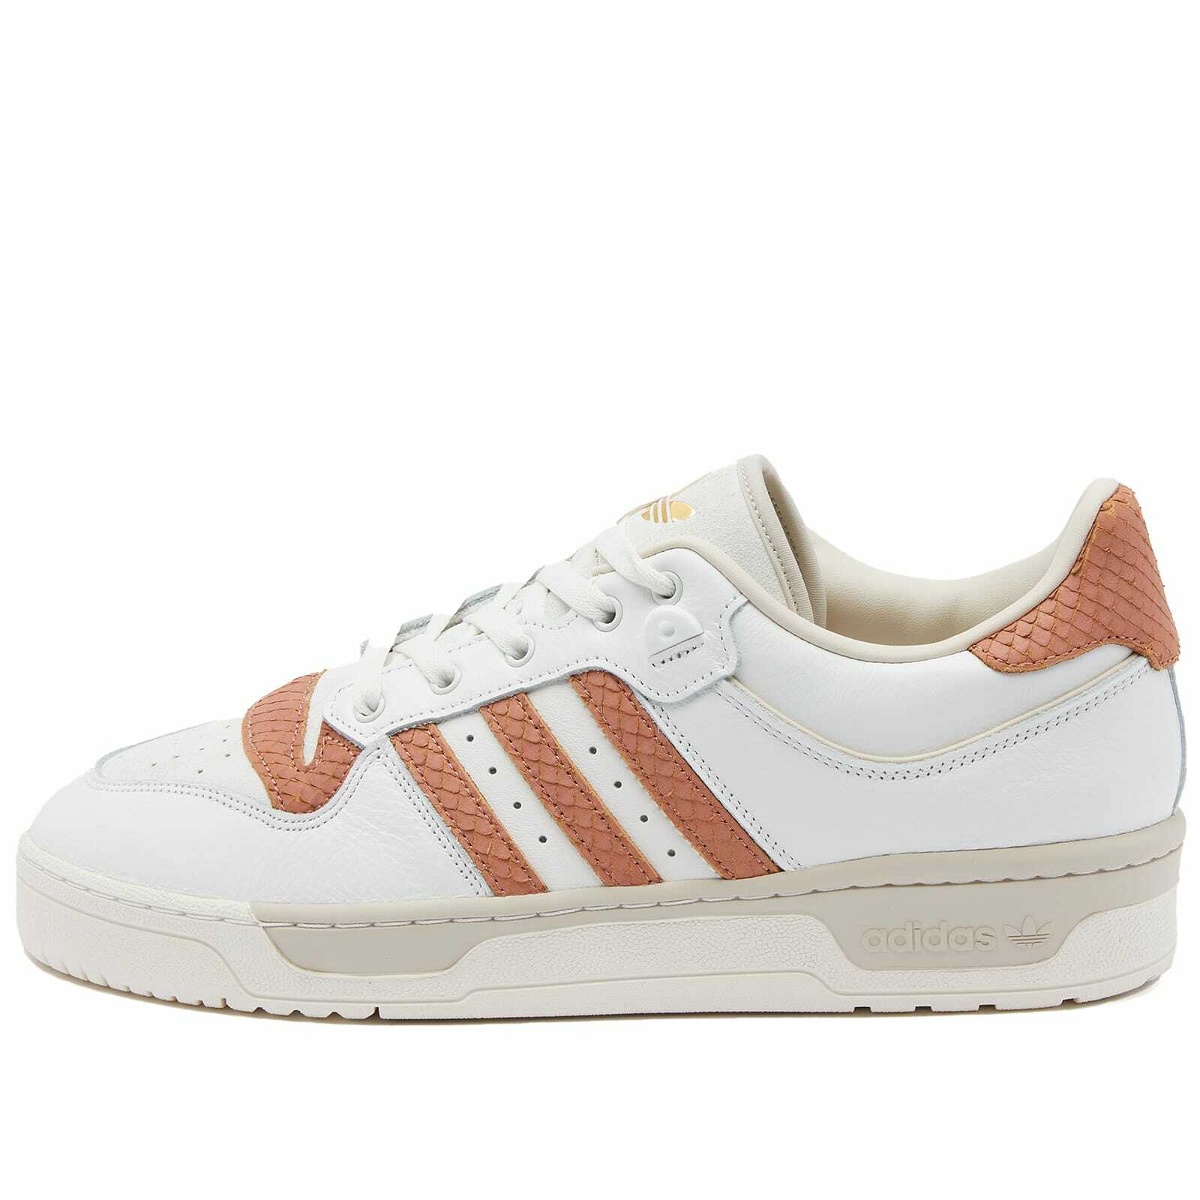 Sneakers in Adidas adidas White/Clay Strata Rivalry 86 Core Low